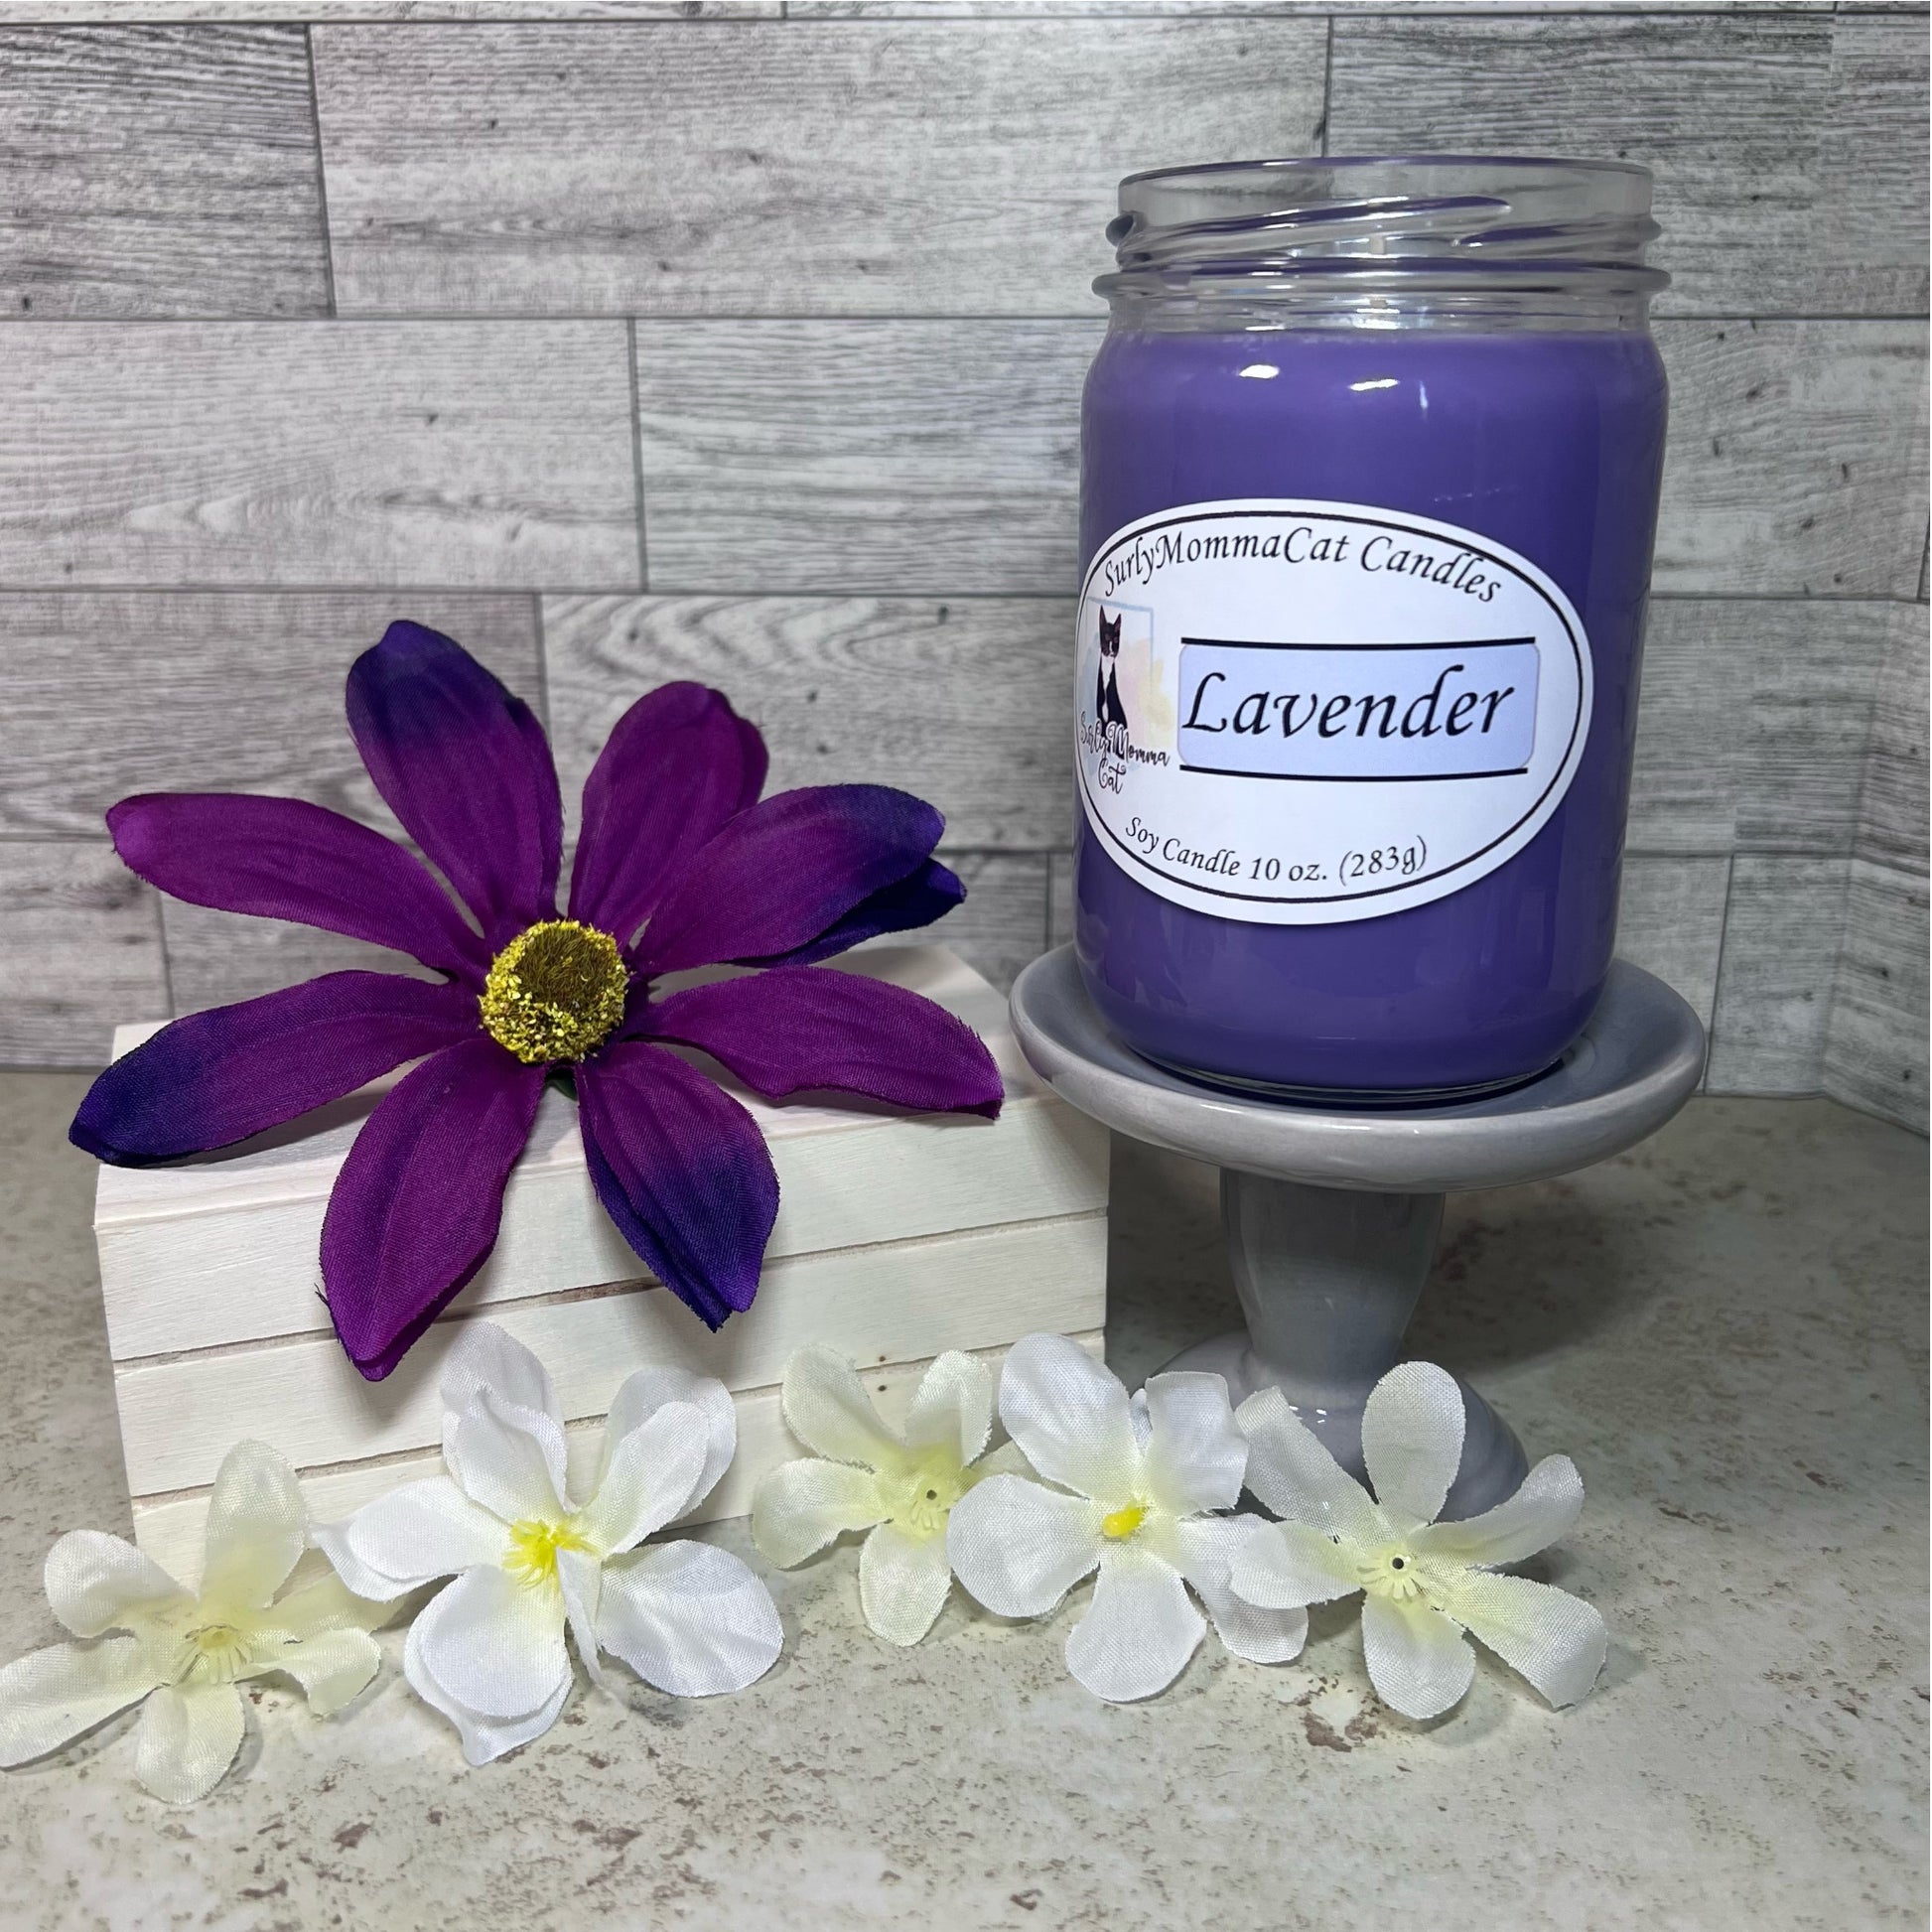 Purple Lavender Soy Glass Jar candle. Five white flowers and one purple flower for decoration.